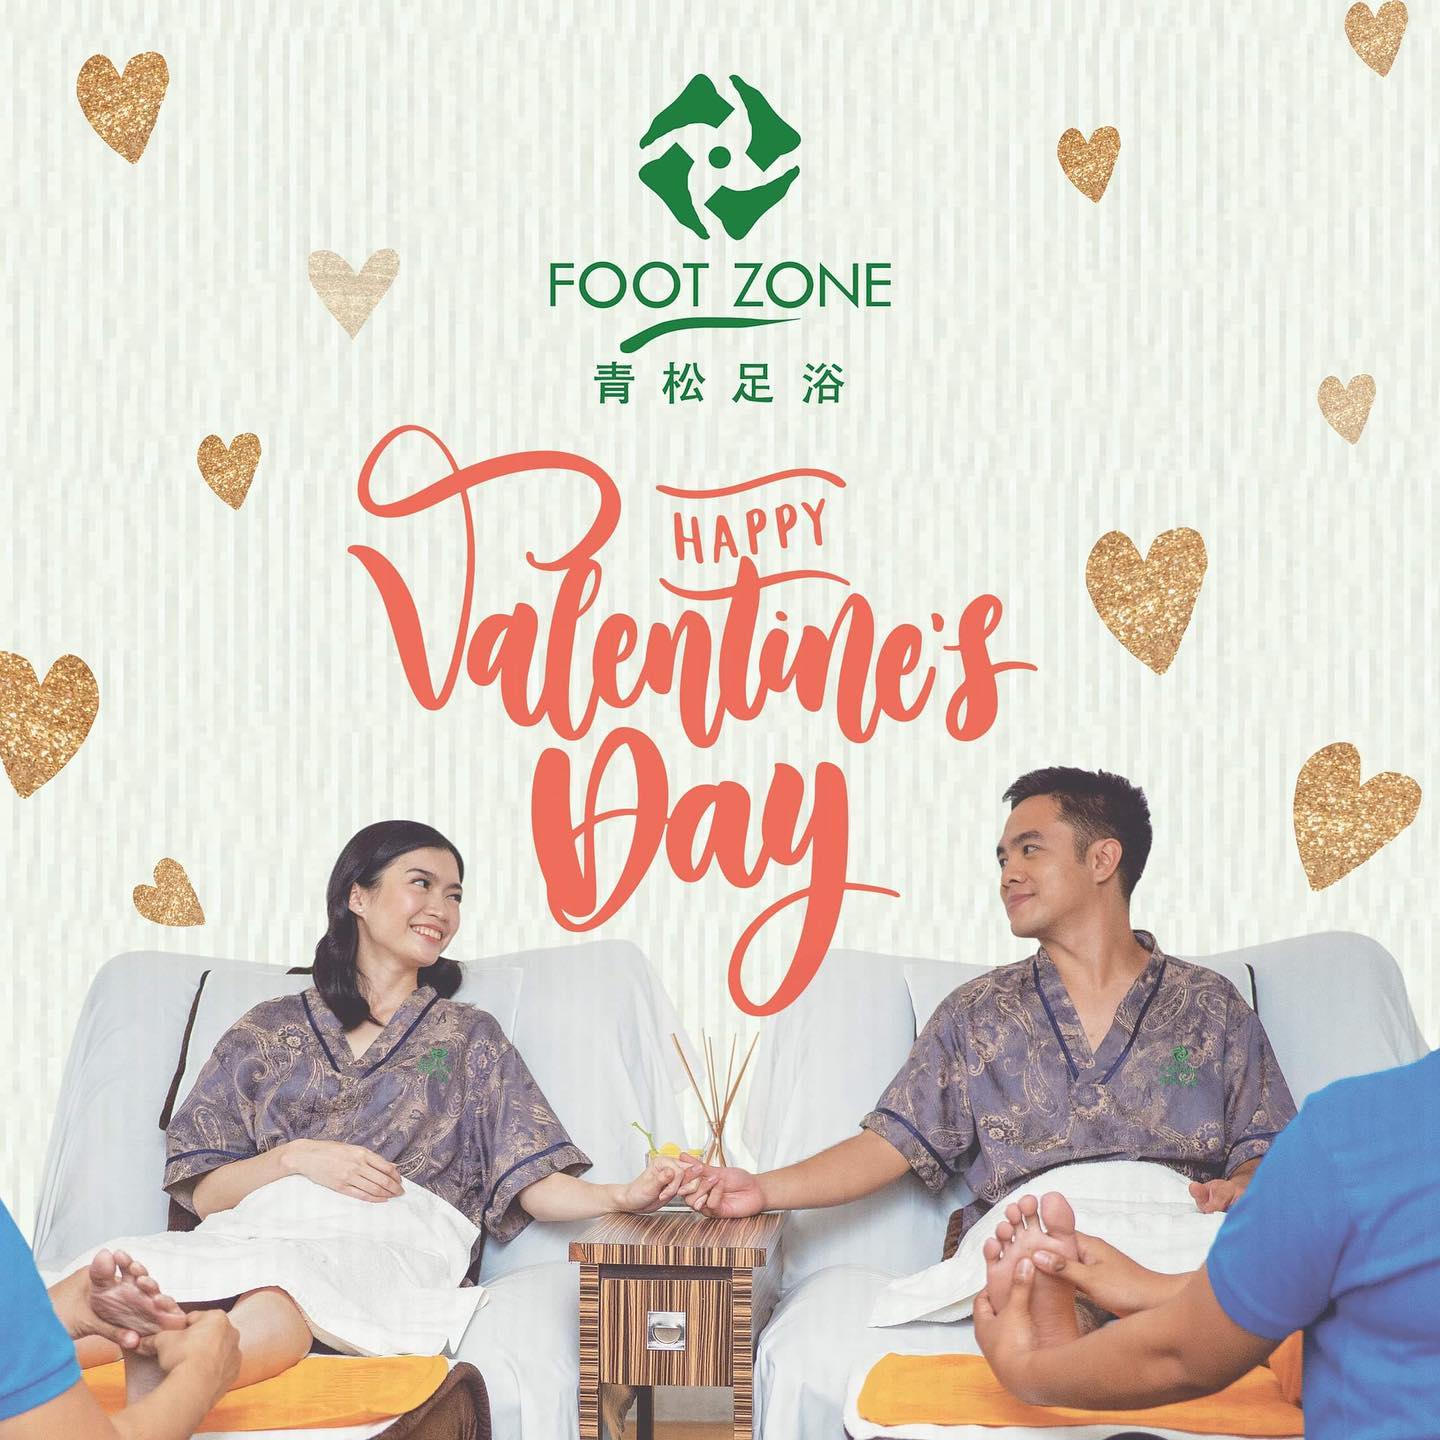 Foot Zone Makati ad designed by their in-house creative